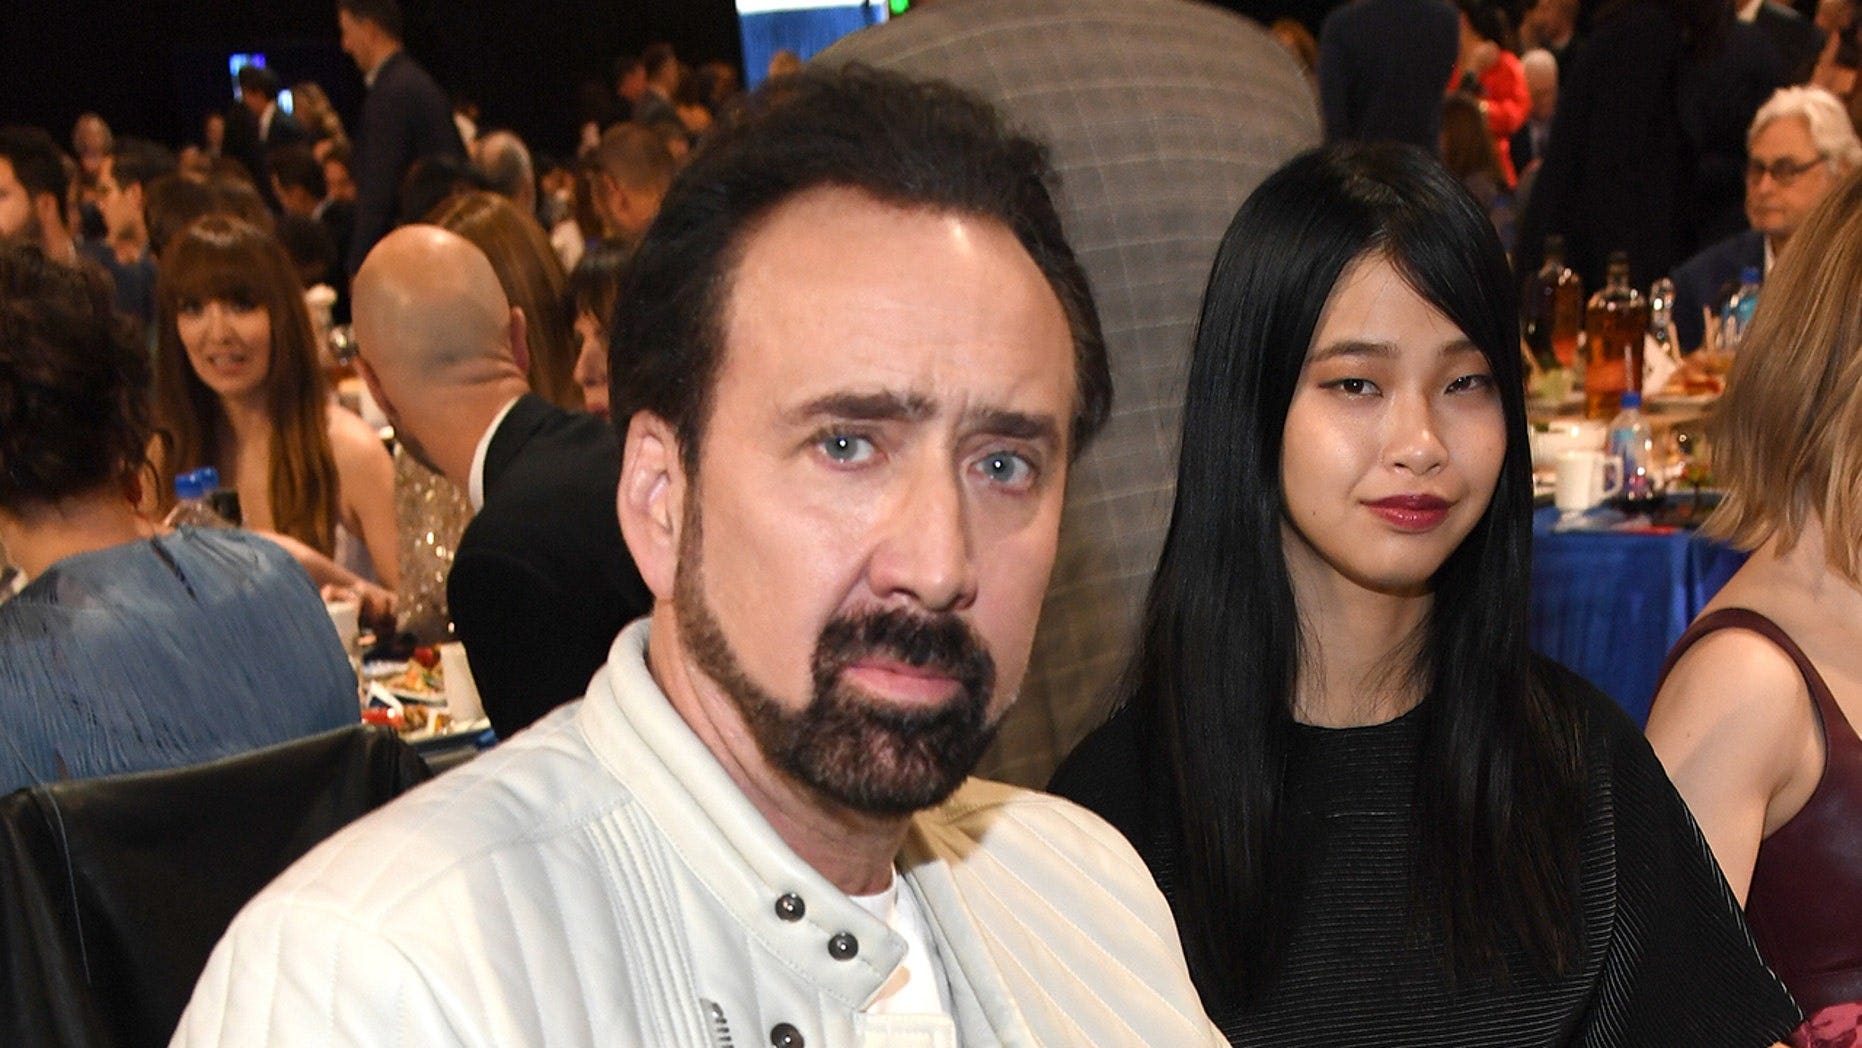 Nicolas Cage, wife Riko Shibata expecting first child together - Sioux